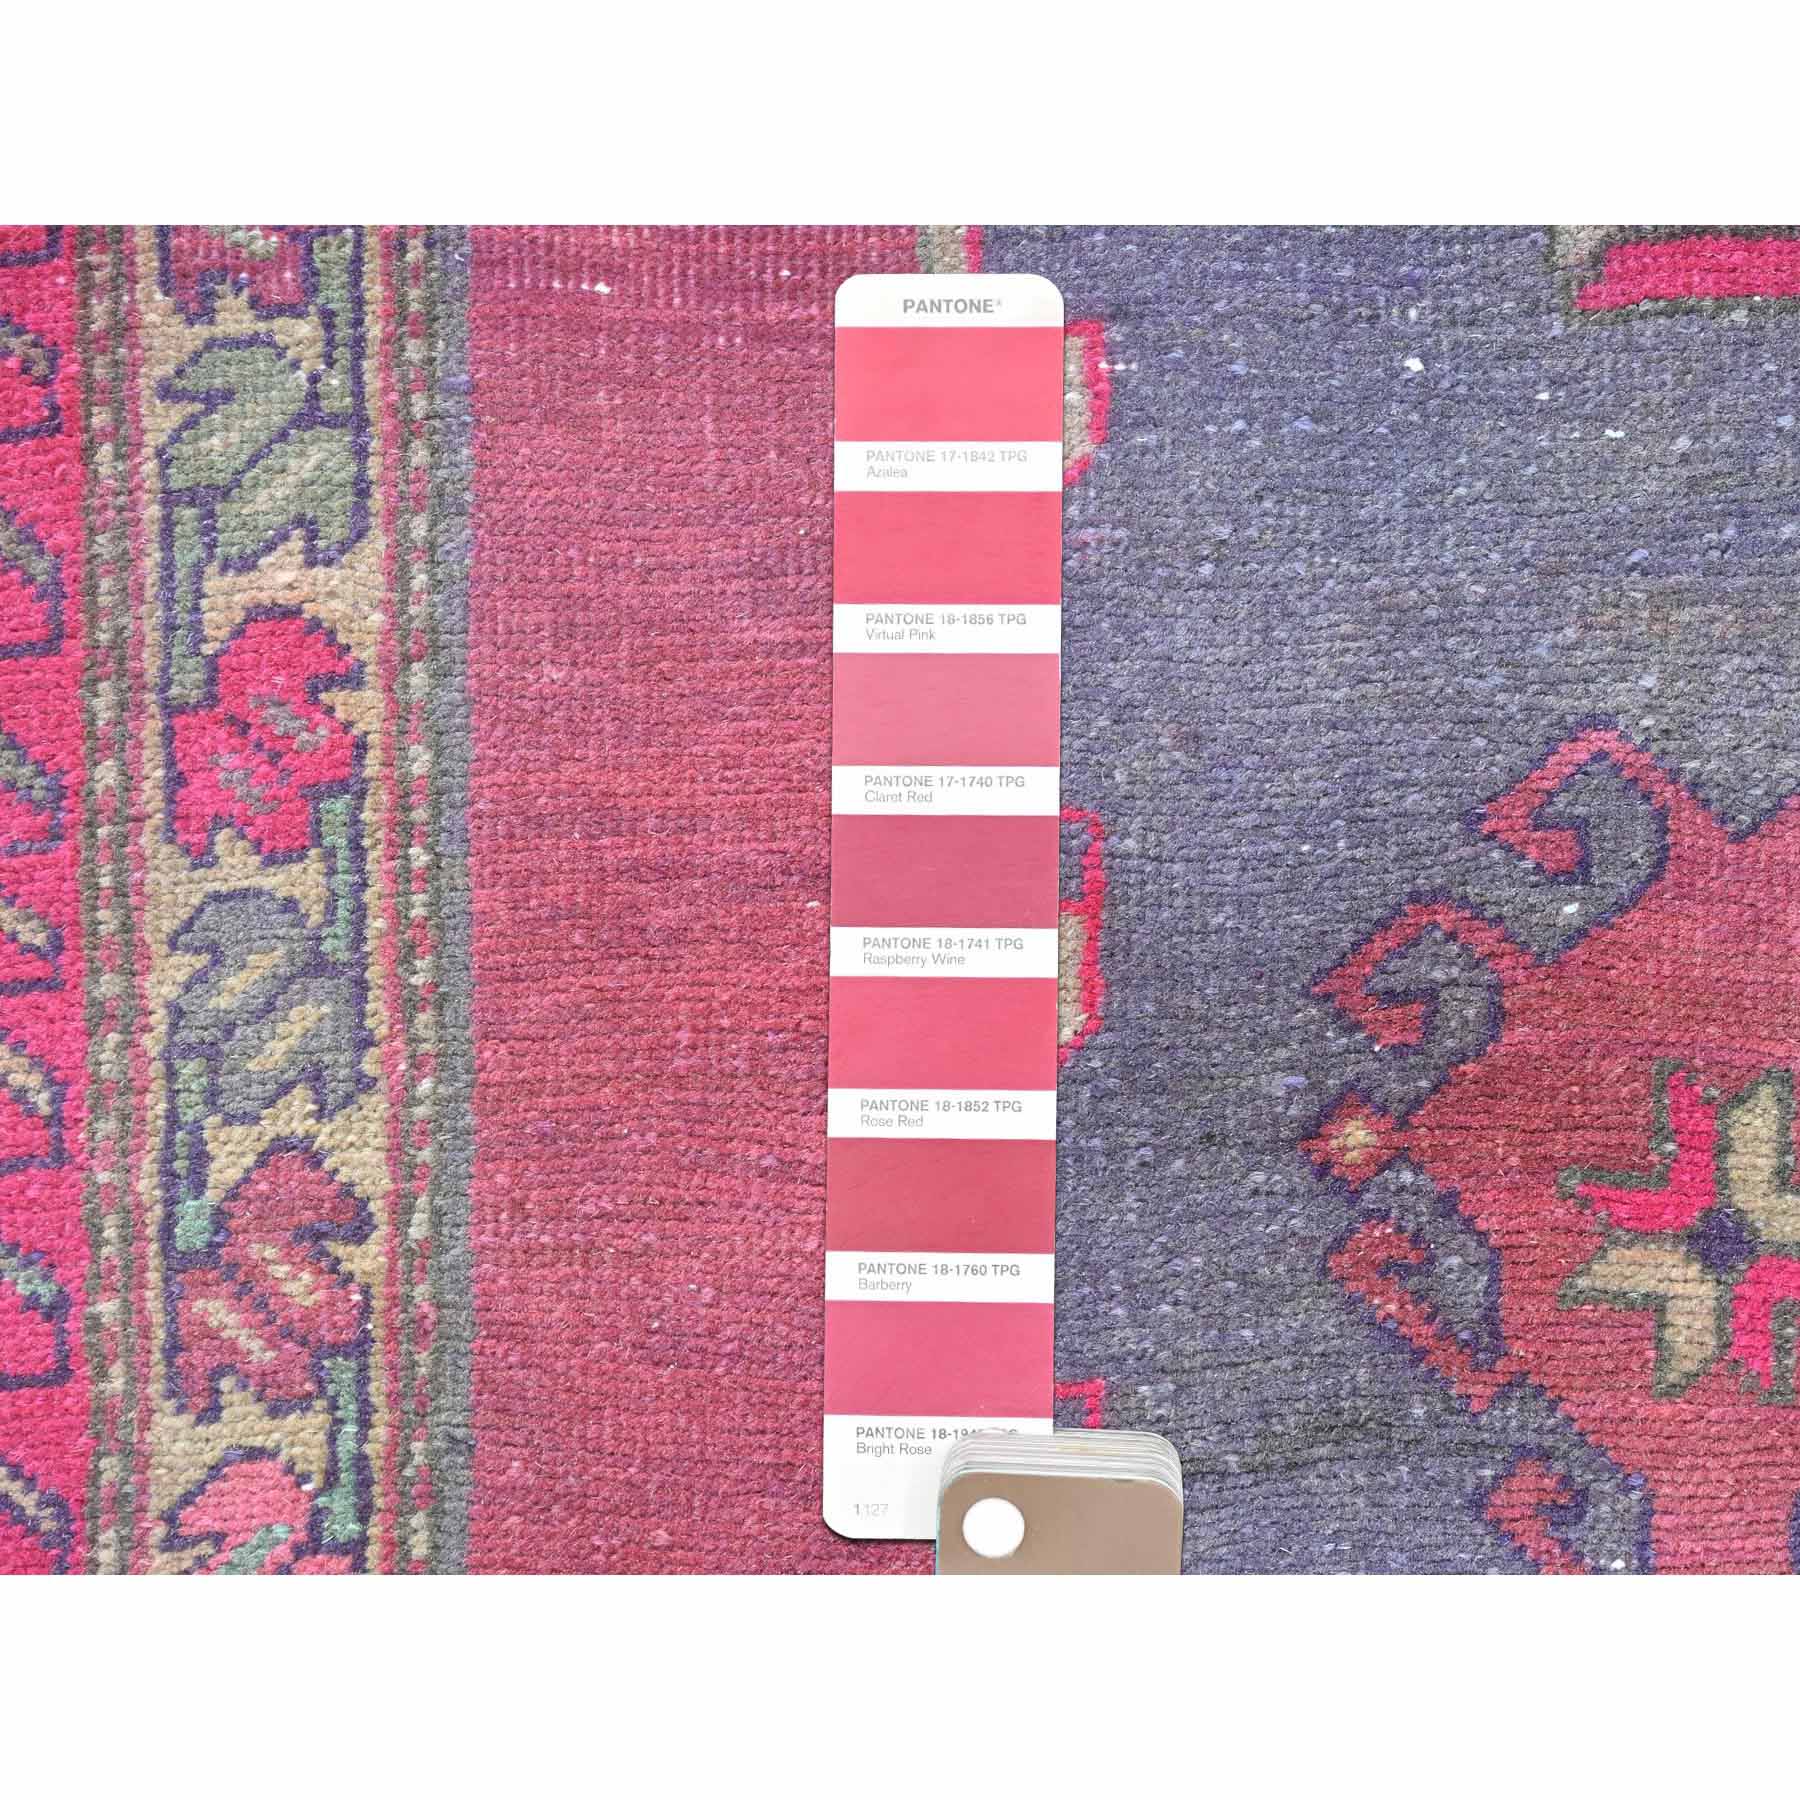 Overdyed-Vintage-Hand-Knotted-Rug-409315